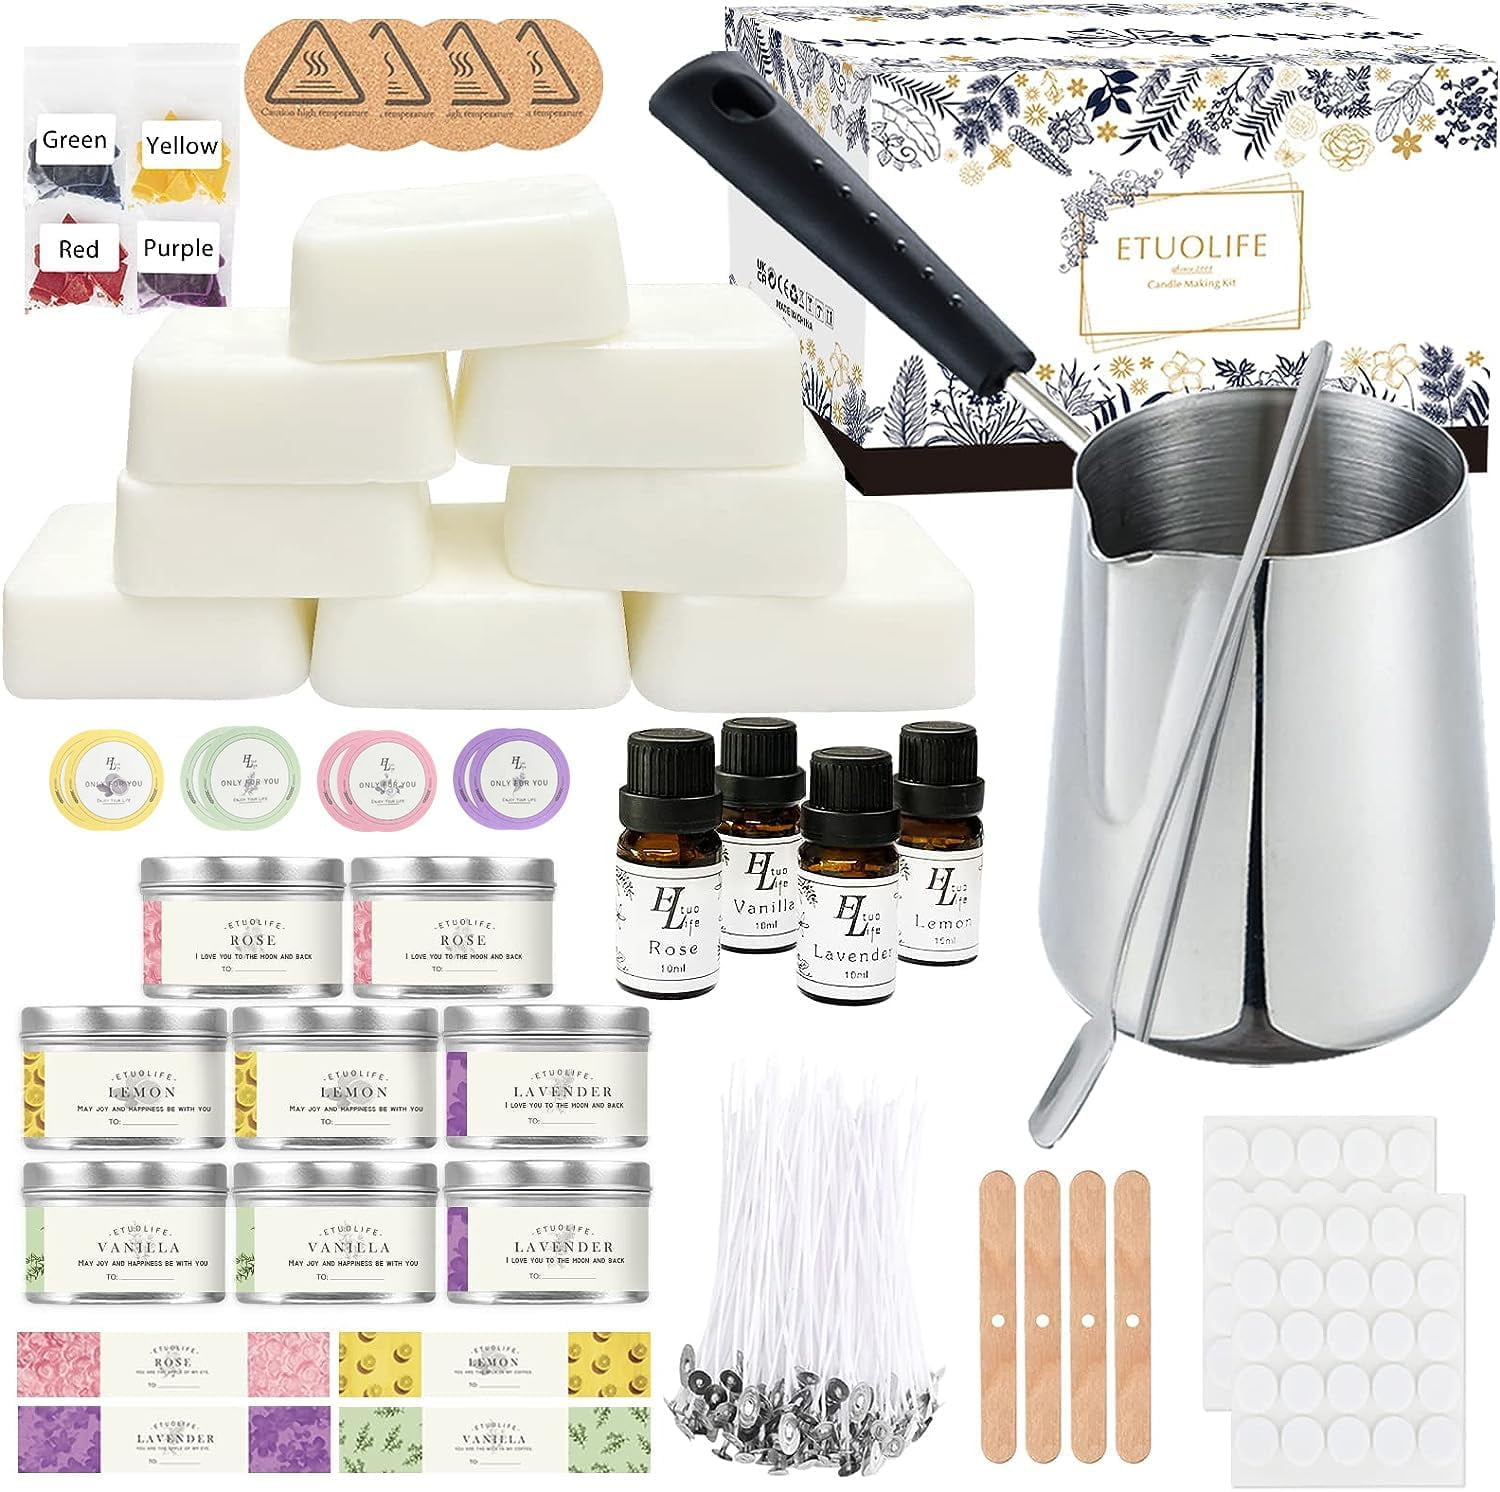 Candle Making Kit - Soy Wax Candle Making Set - Storage Box with Glass Jars  & Complete Candle Making Supplies - DIY Craft Kits for Adults - Arts and  Crafts - Perfect